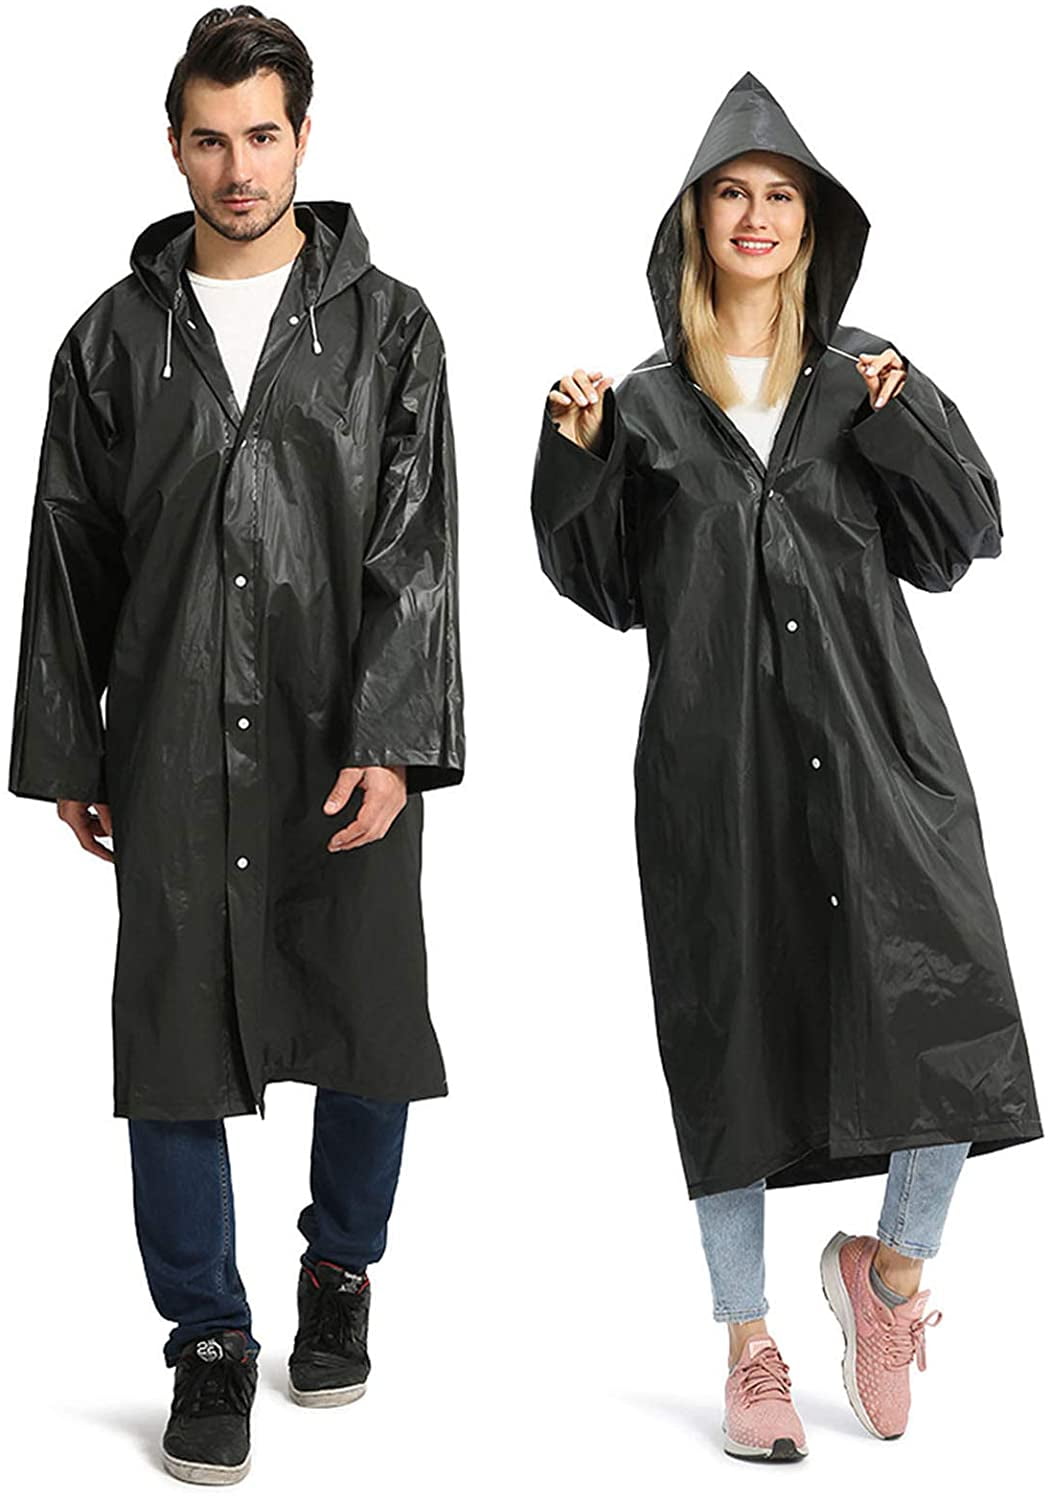 Paciffico Adult Portable Rain Poncho Black Reusable Hooded Raincoat Emergency Unisex Outdoor Rainwear for Camping/Traveling/Concerts 